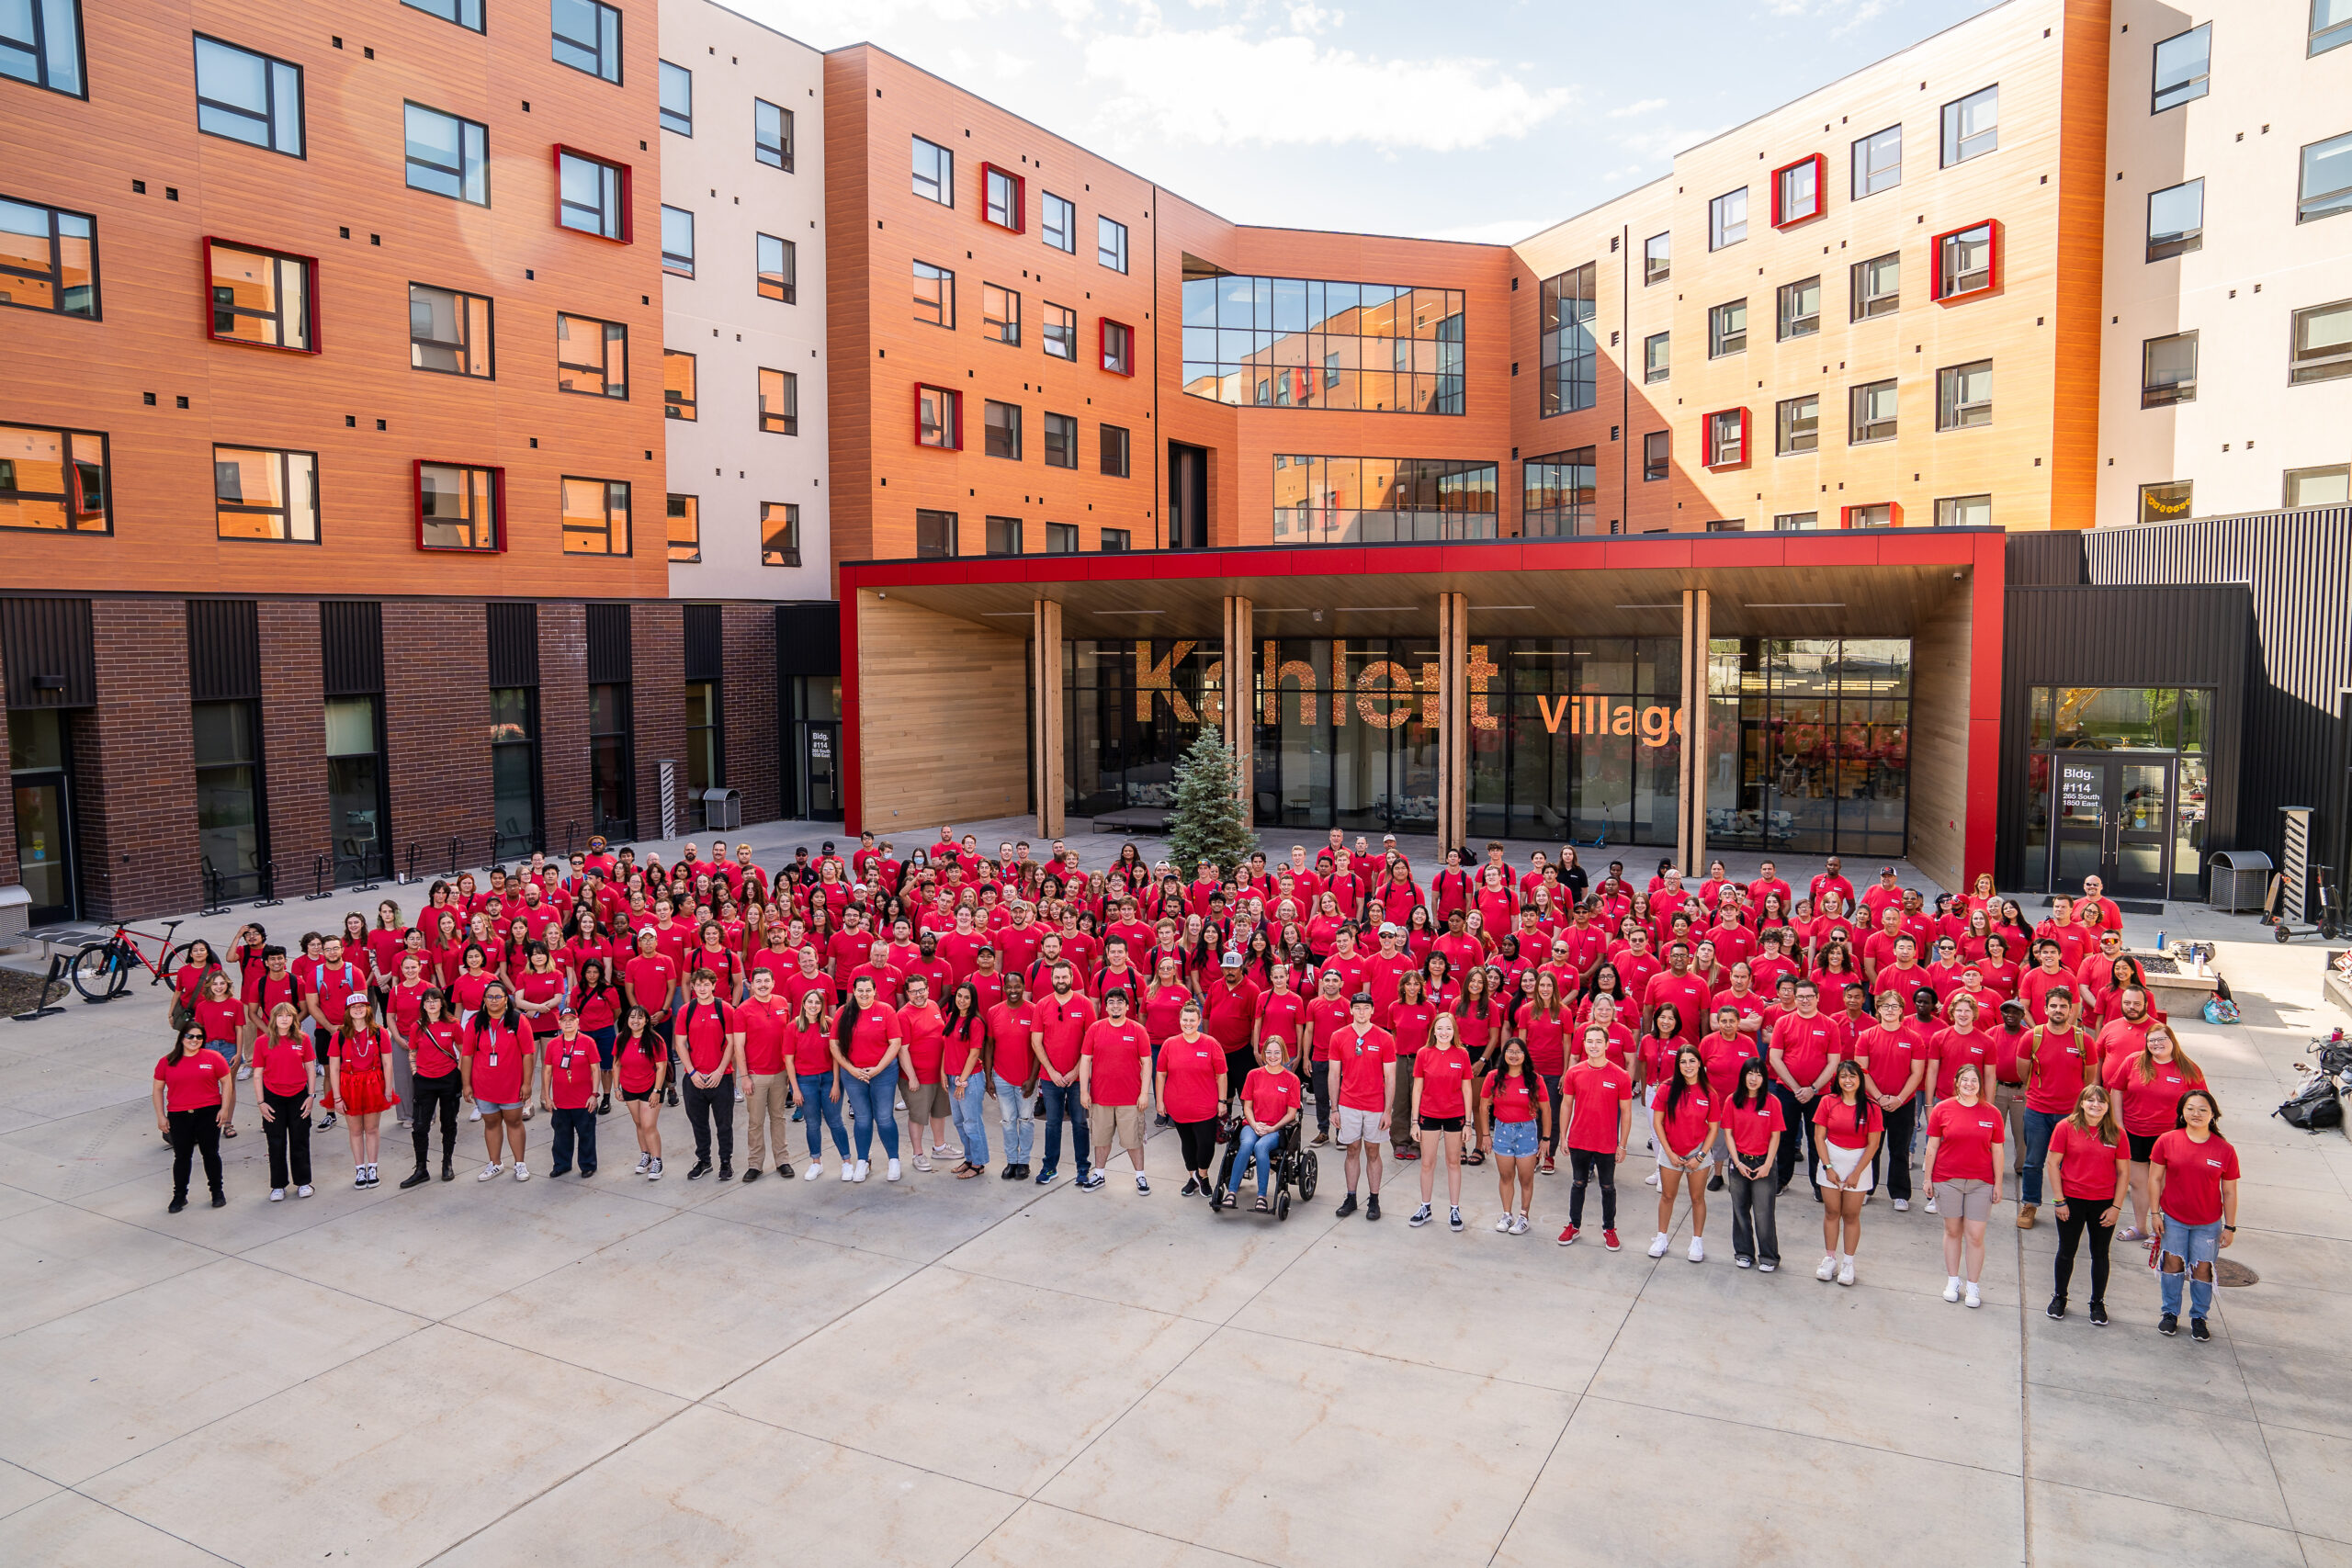 This image shows a picture of the staff at housing and residential education at the university of utah